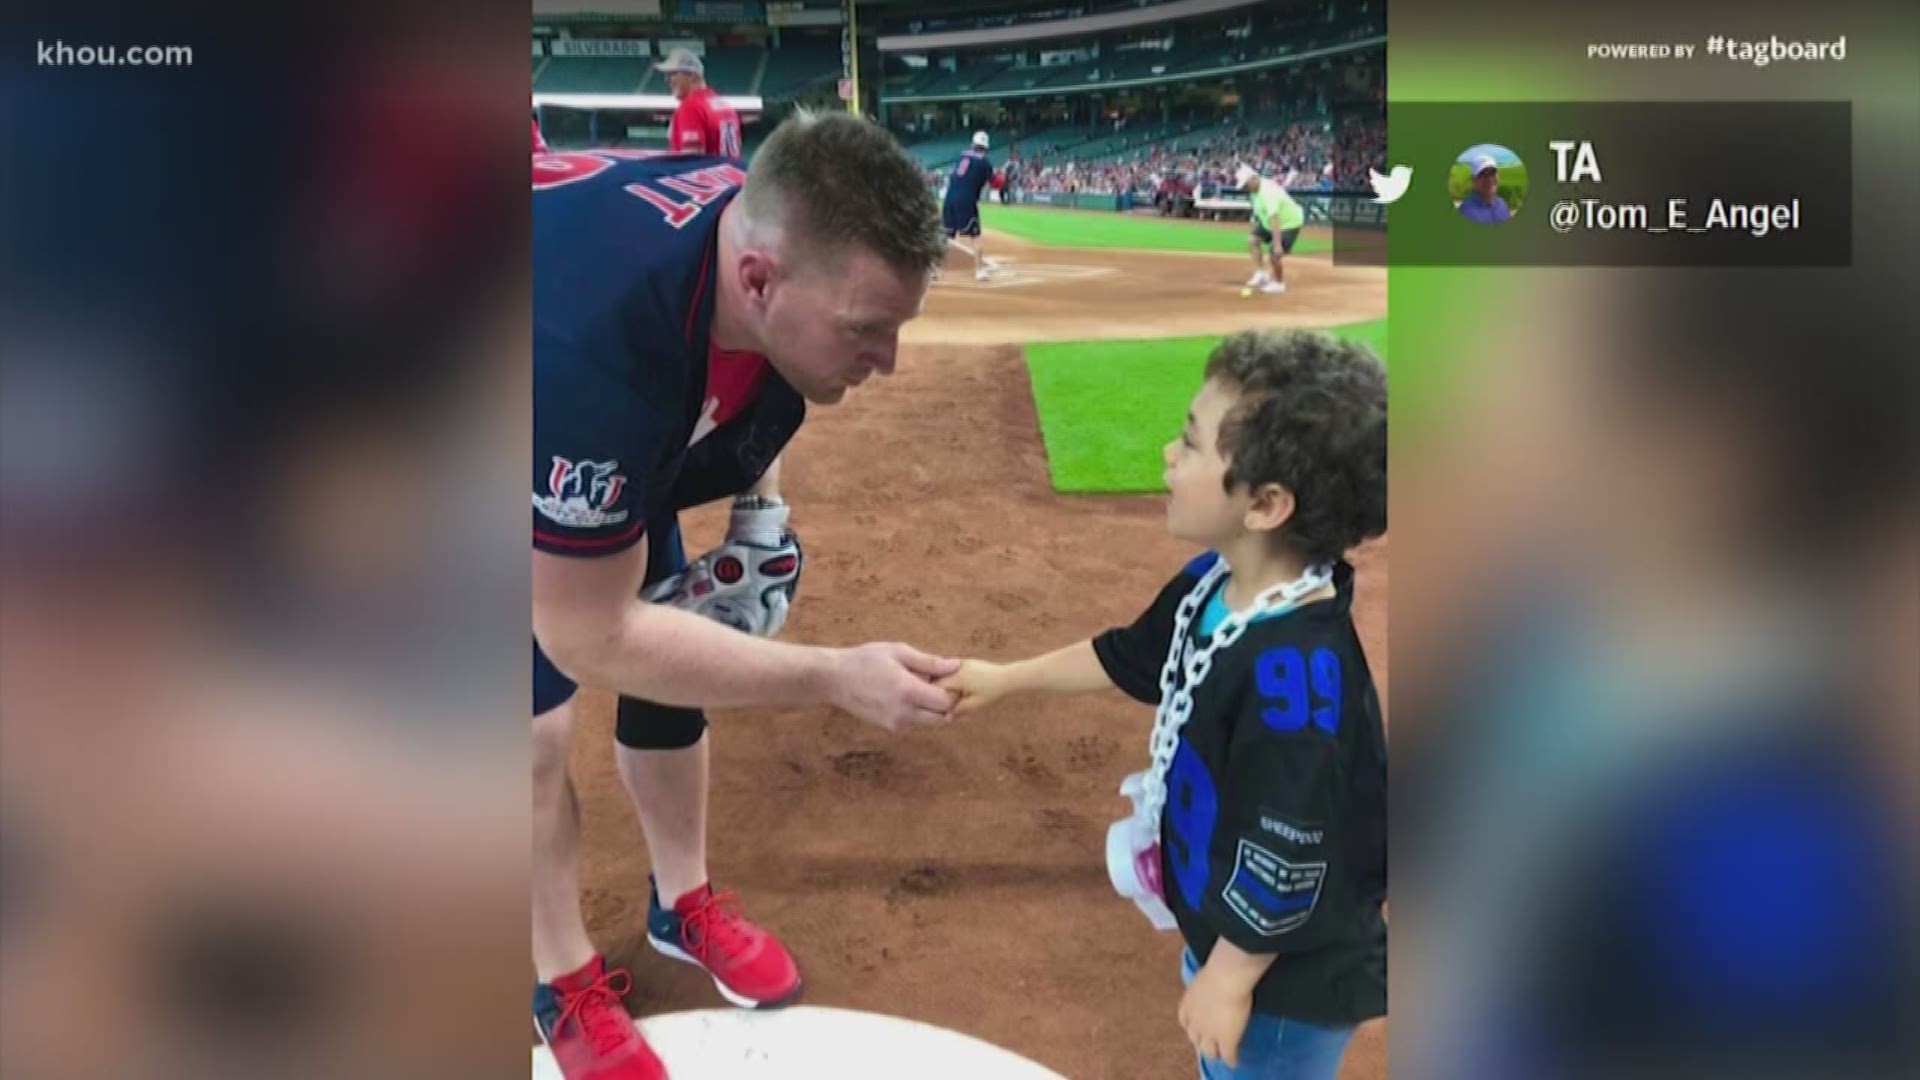 In a heartwarming meeting, JJ Watt shook hands with honorary Freeport police officer Abigail at his charity softball game over the weekend. Abigail is battling cancer.